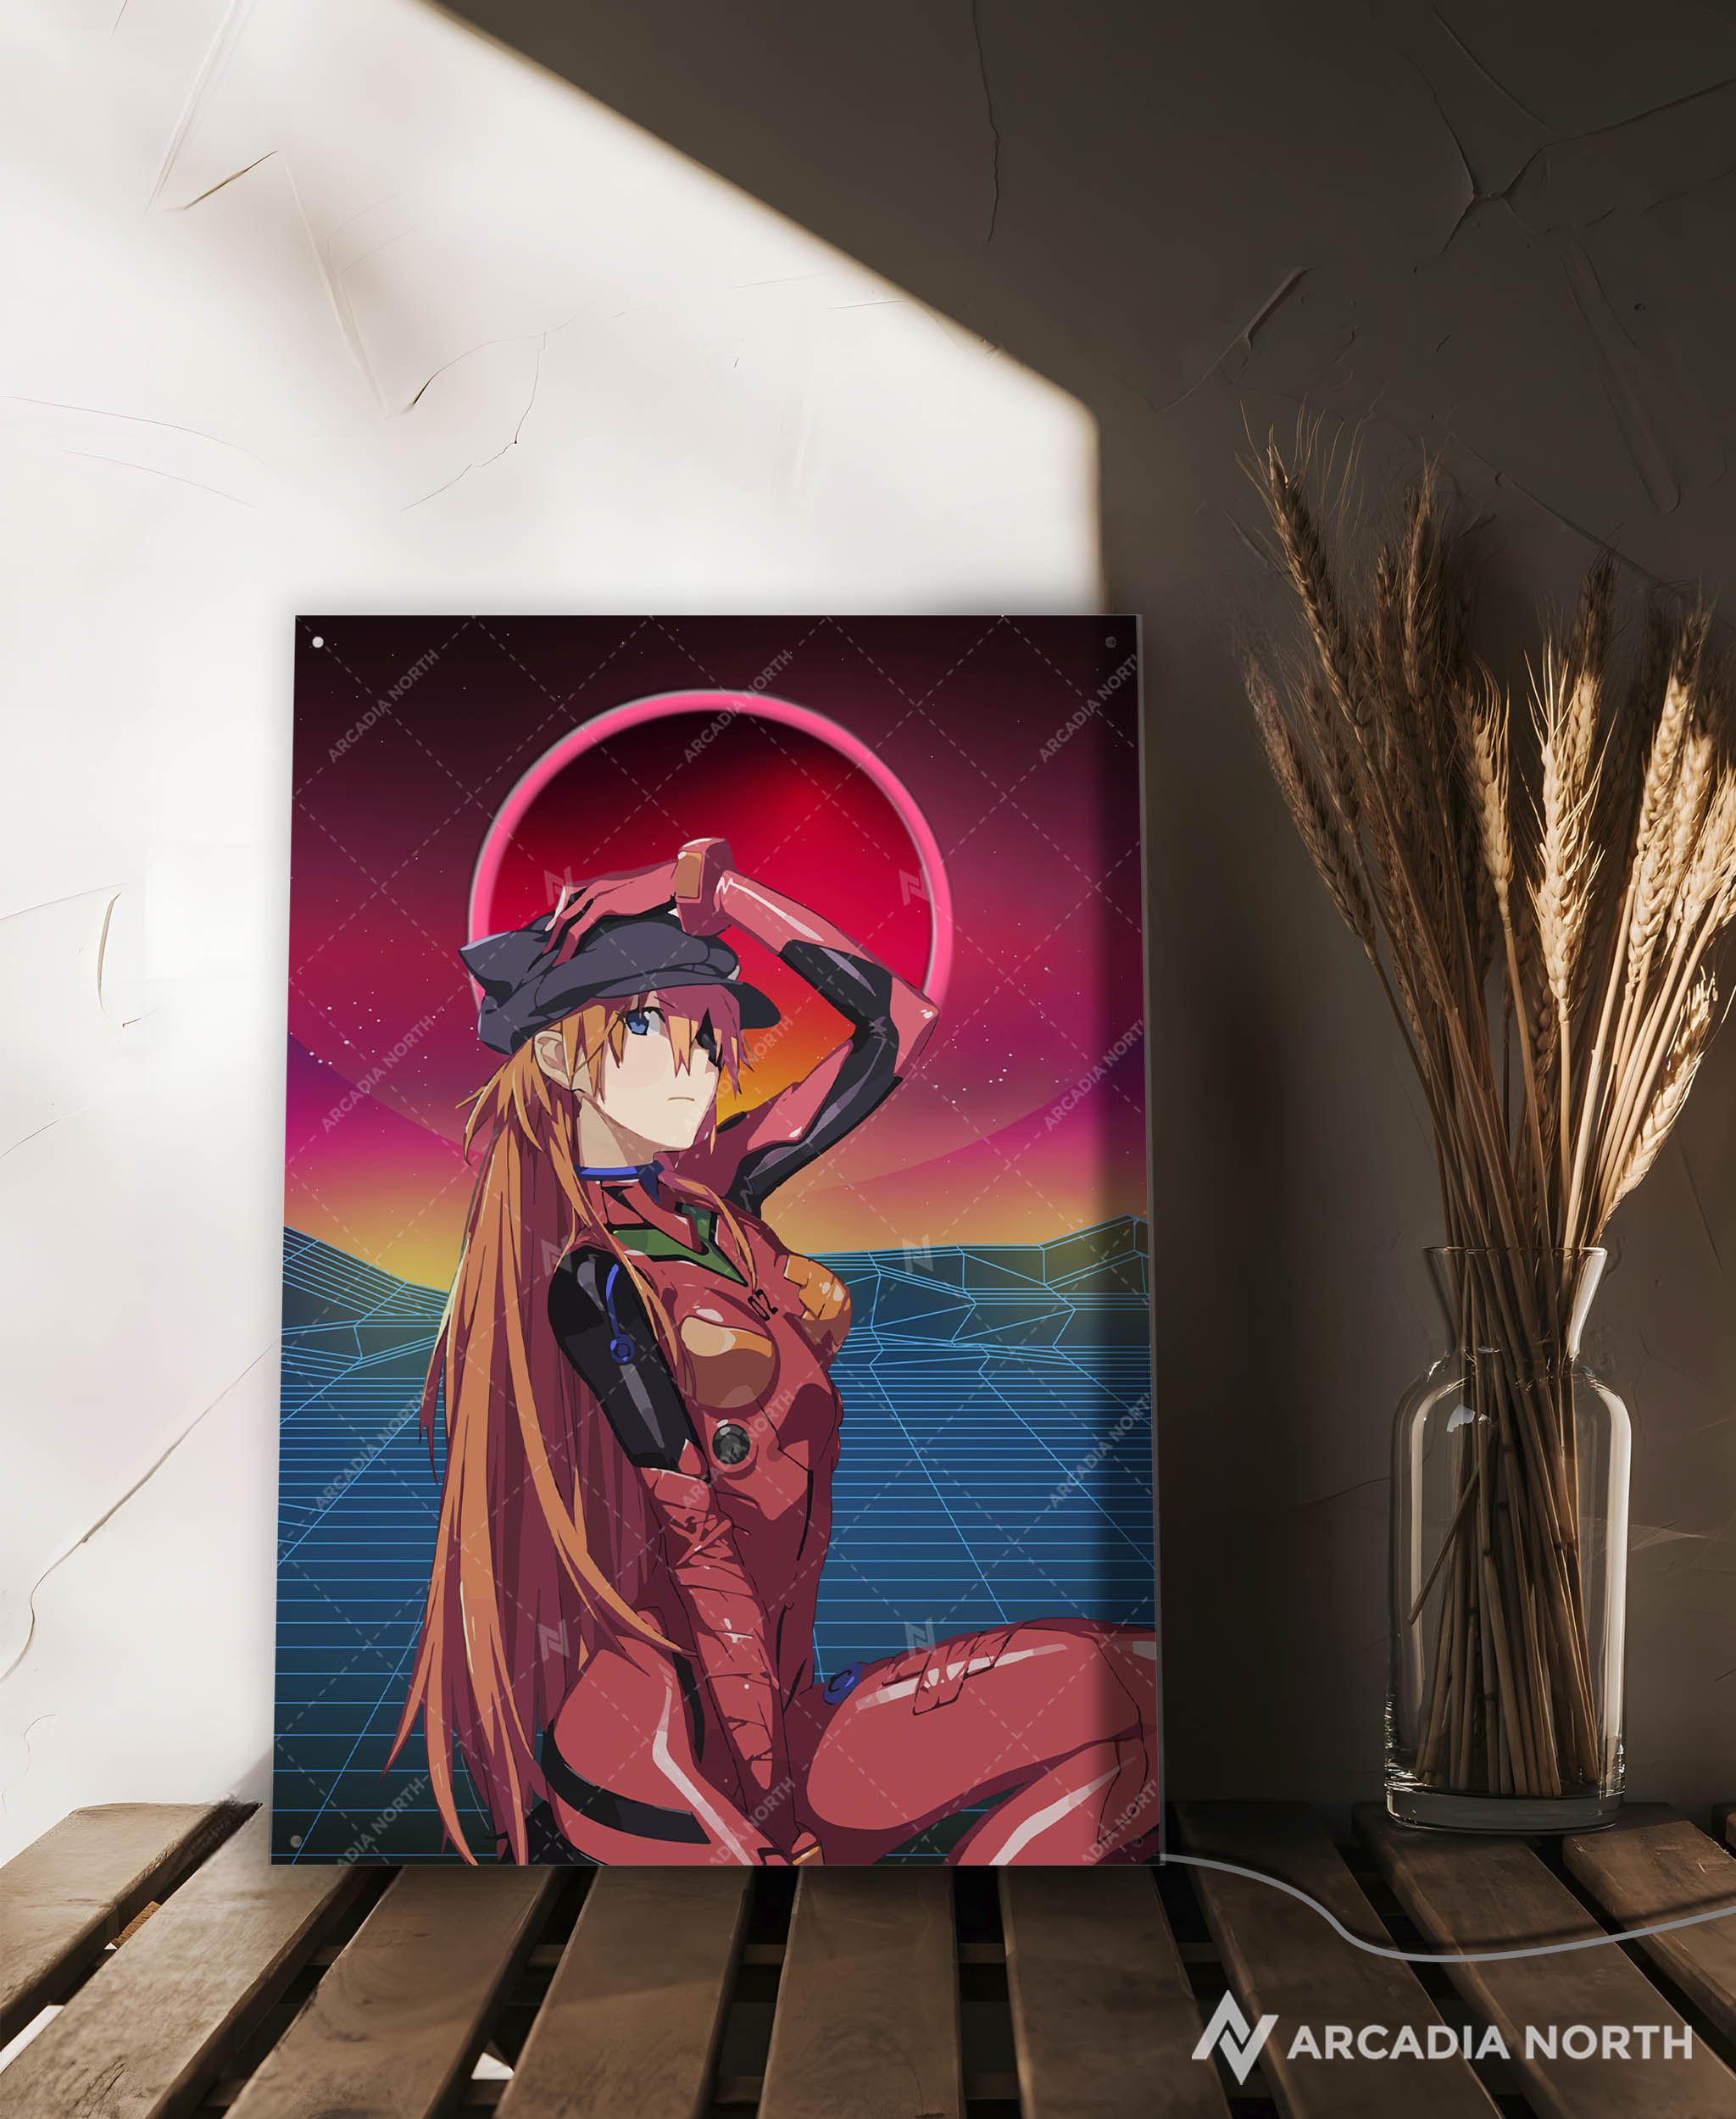 Arcadia North AURALIGHT - an LED Poster featuring the anime Neon Genesis Evangelion with Asuka Langley Soryu on a synthwave style backdrop. Illuminated by glowing neon LED lights. UV-printed on acrylic.